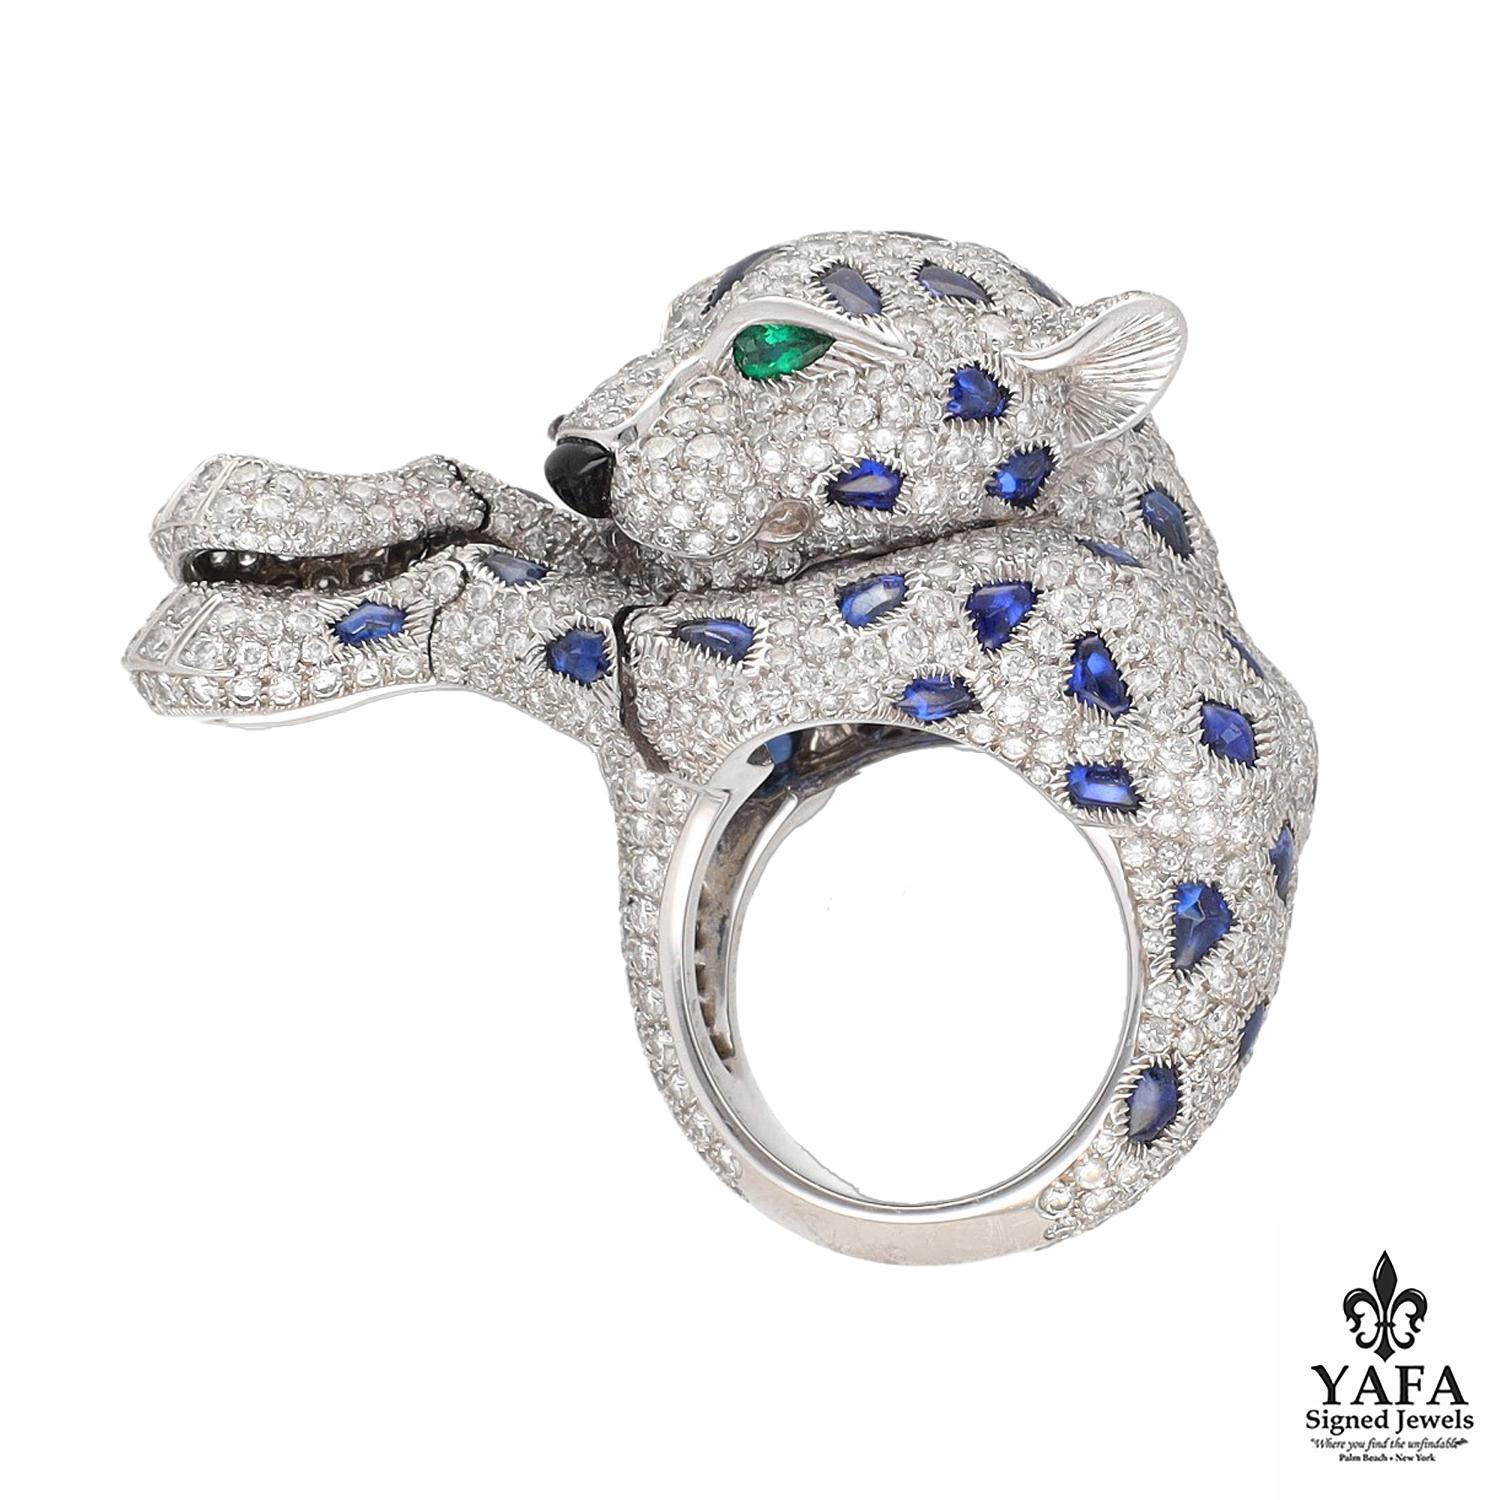 Cartier Diamond and Sapphire, Emerald and Onyx - Articulated Paws Panther Ring.
Approximately Diamond Weight 4.50 CTS, Embellished with Sapphire Spots, Emerald Eyes and an Onyx Nose.
Size 53 / 6.25
French Assay Marks
Signed - Cartier